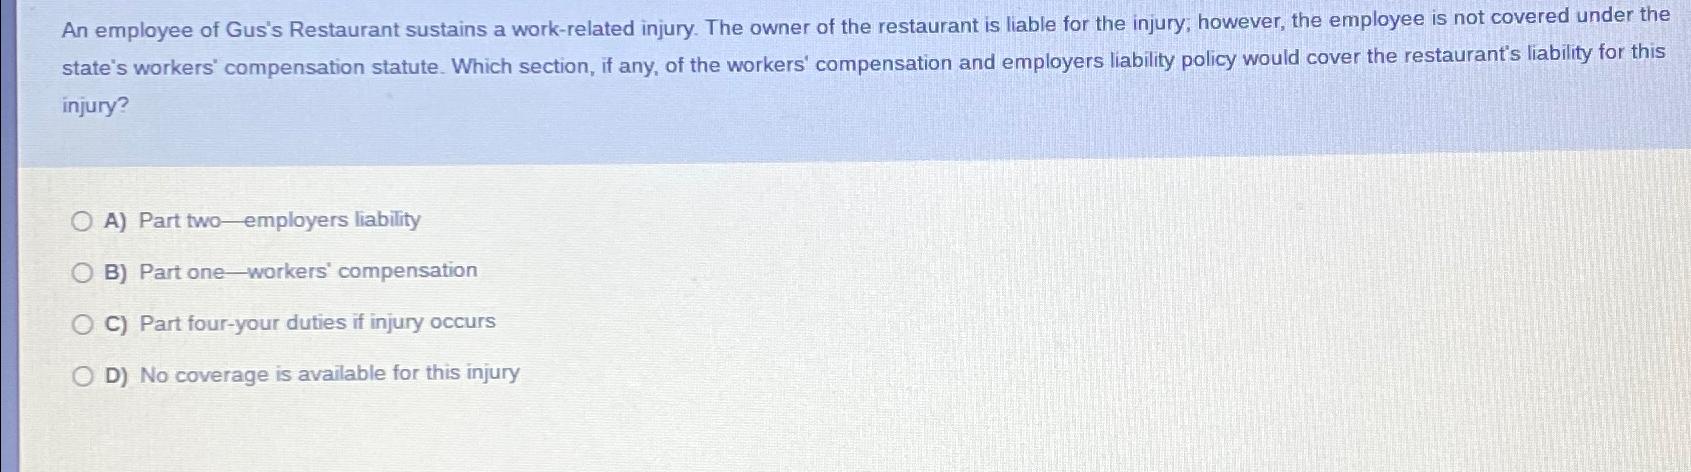 An employee of Gus's Restaurant sustains a work-related injury. The owner of the restaurant is liable for the